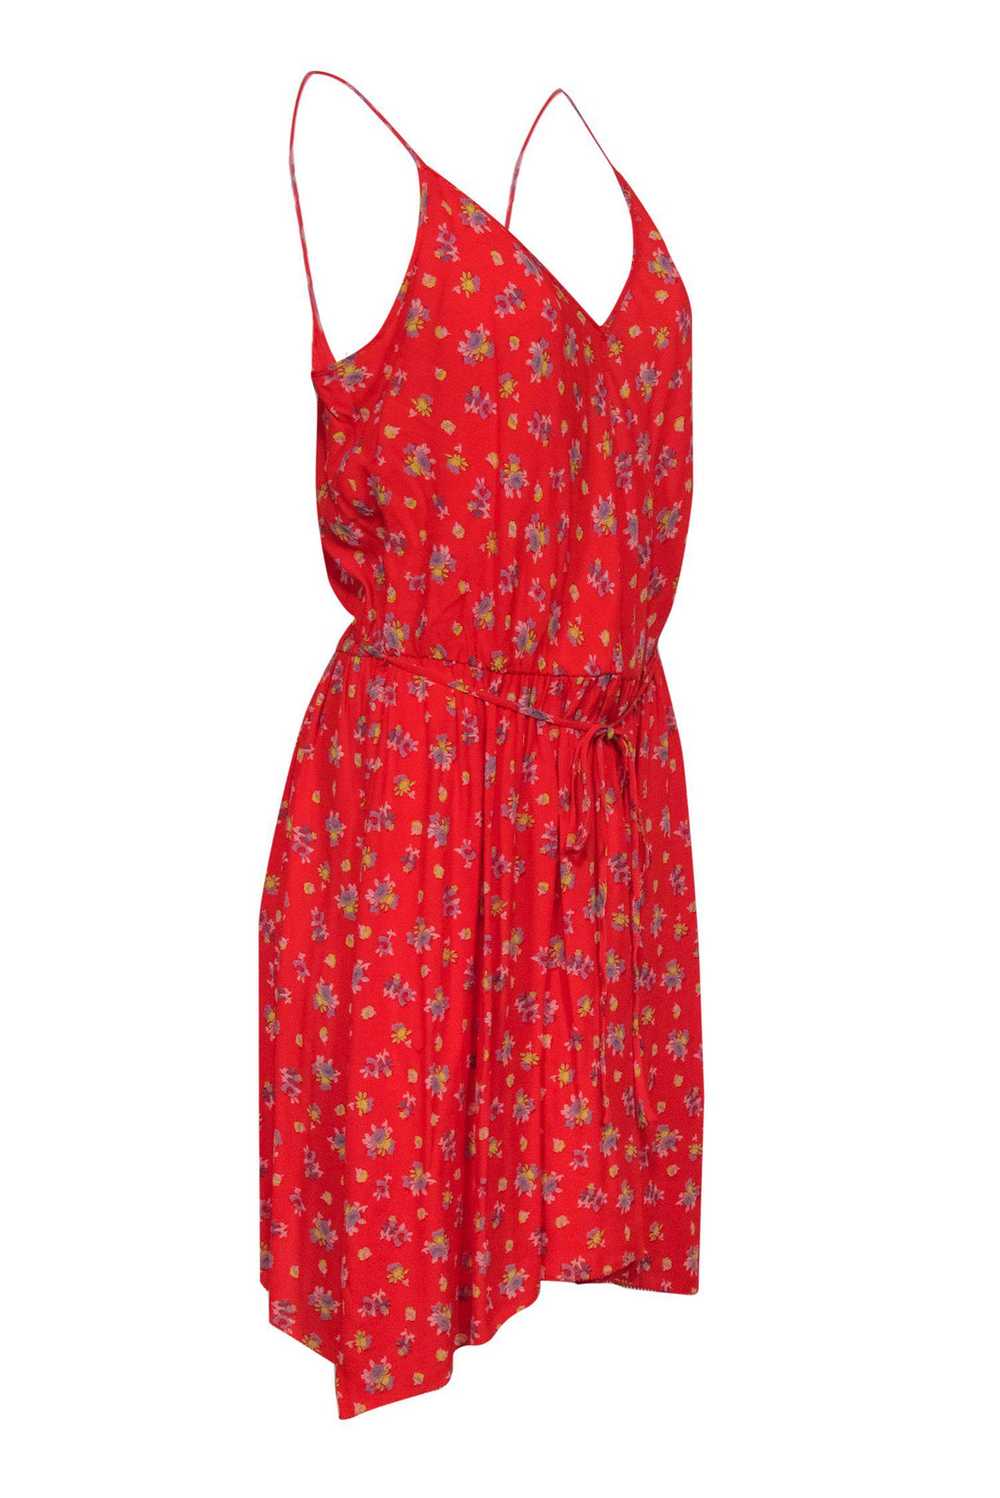 Rebecca Taylor - Red Floral Fitted Sundress Sz 10 - image 2